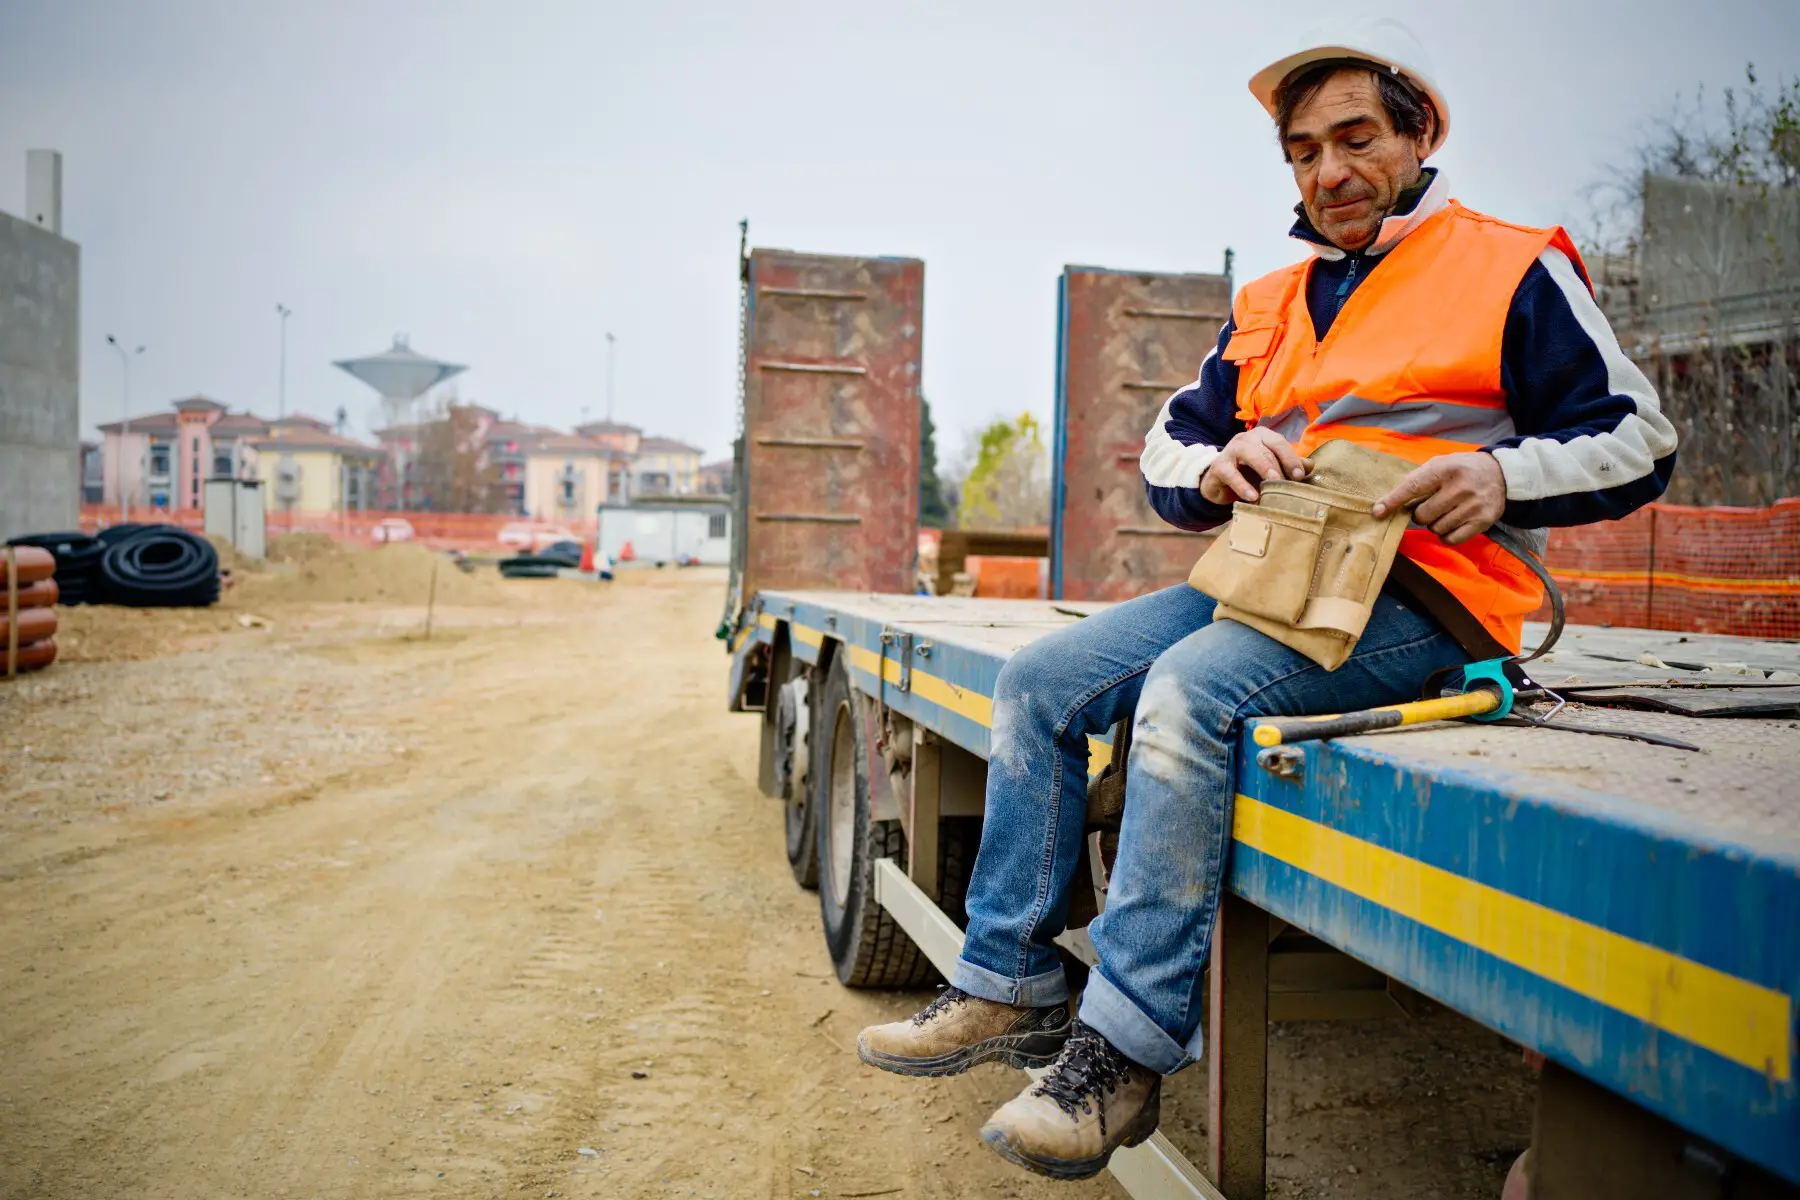 A construction worker in an orange vest and hard hat takes a break sitting on the bed of a trailer truck